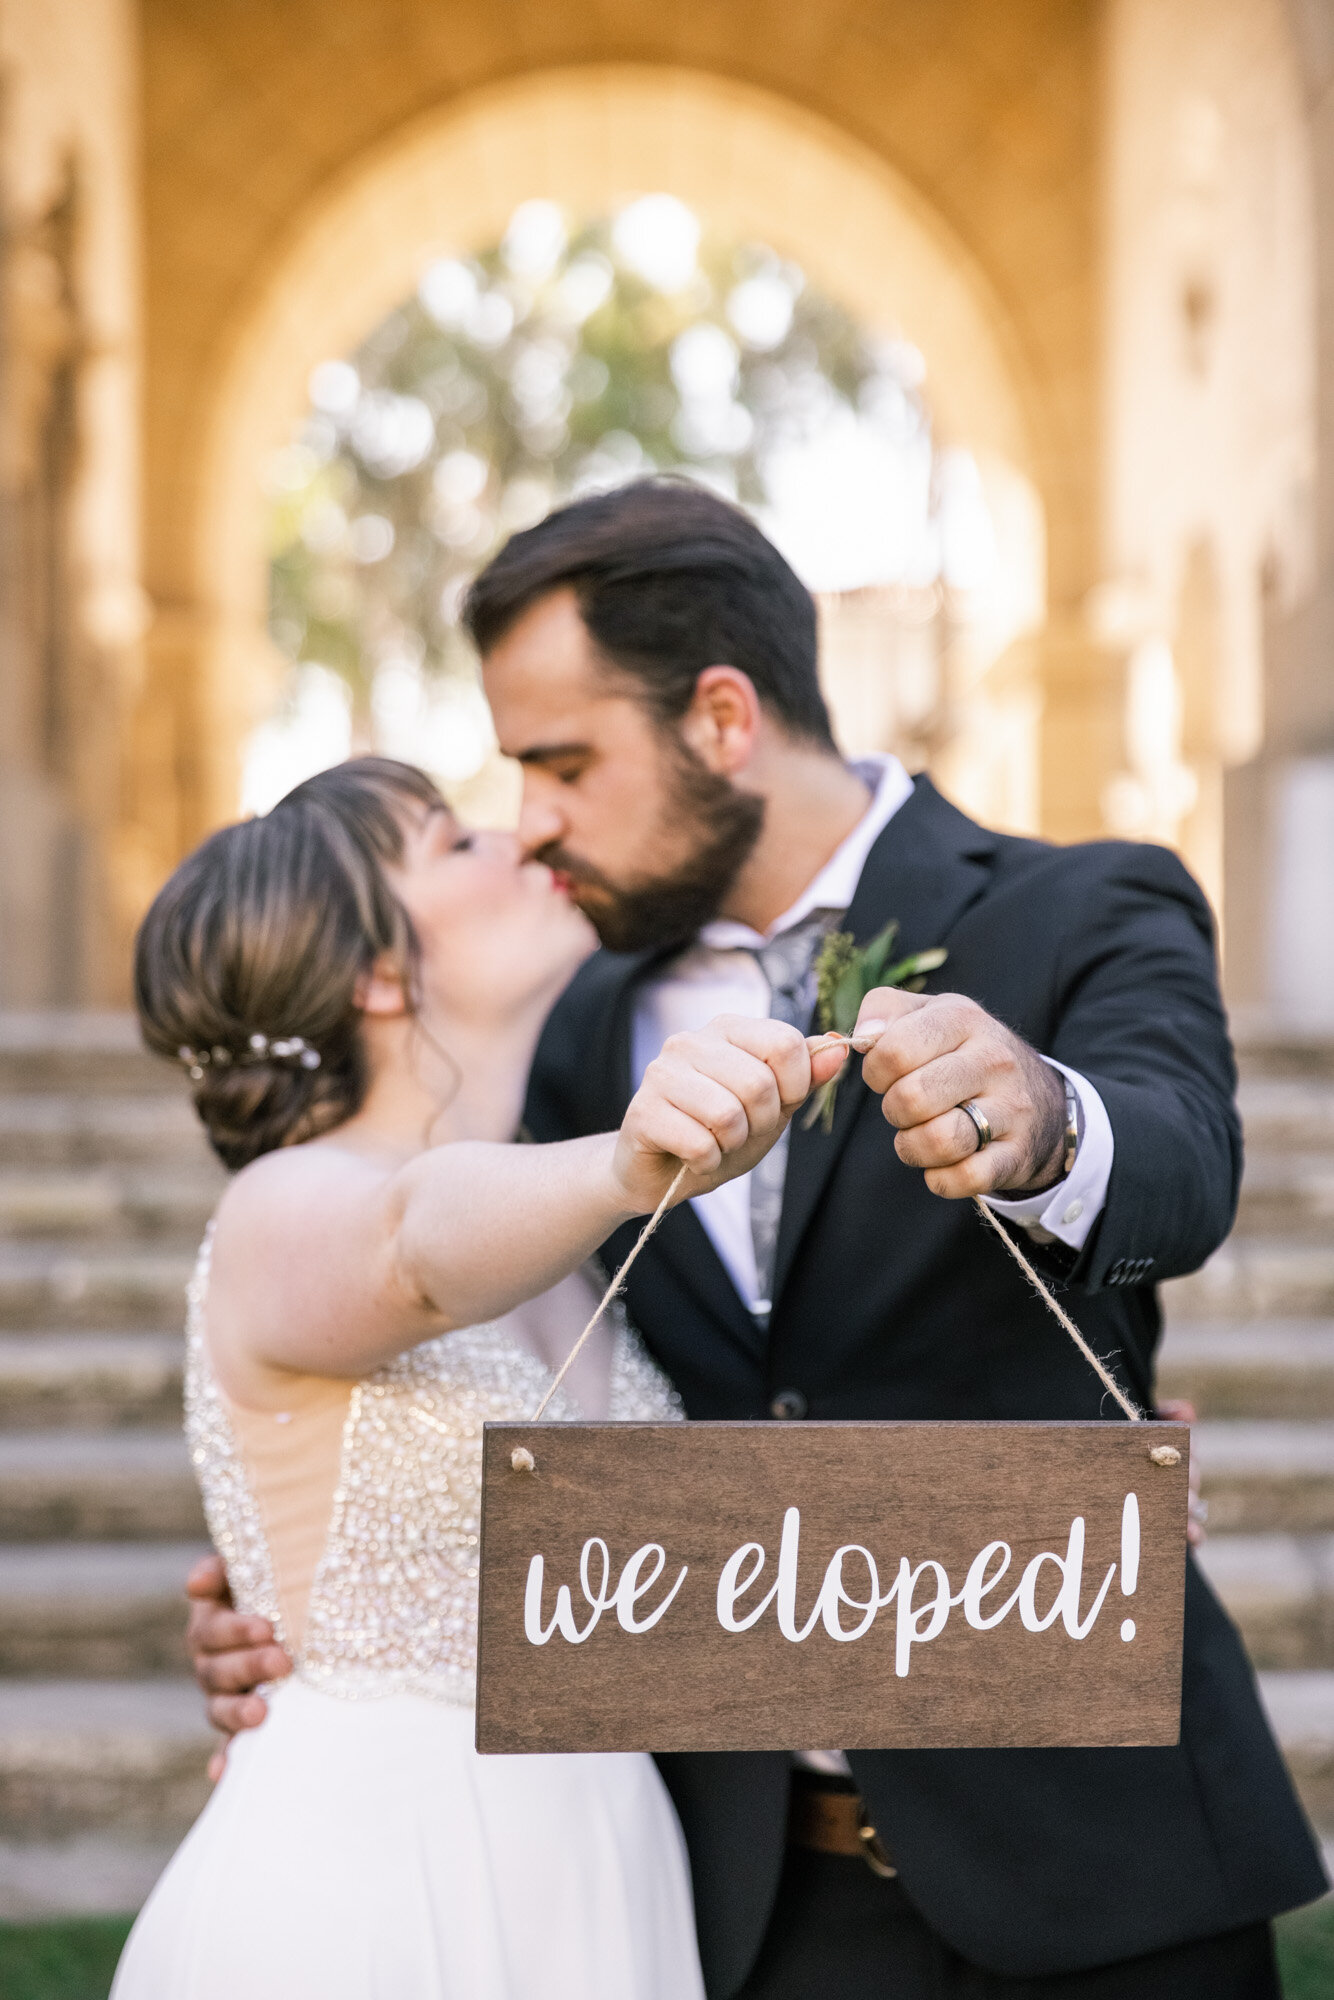 Elopement photography Santa Barbara Courthouse with sign